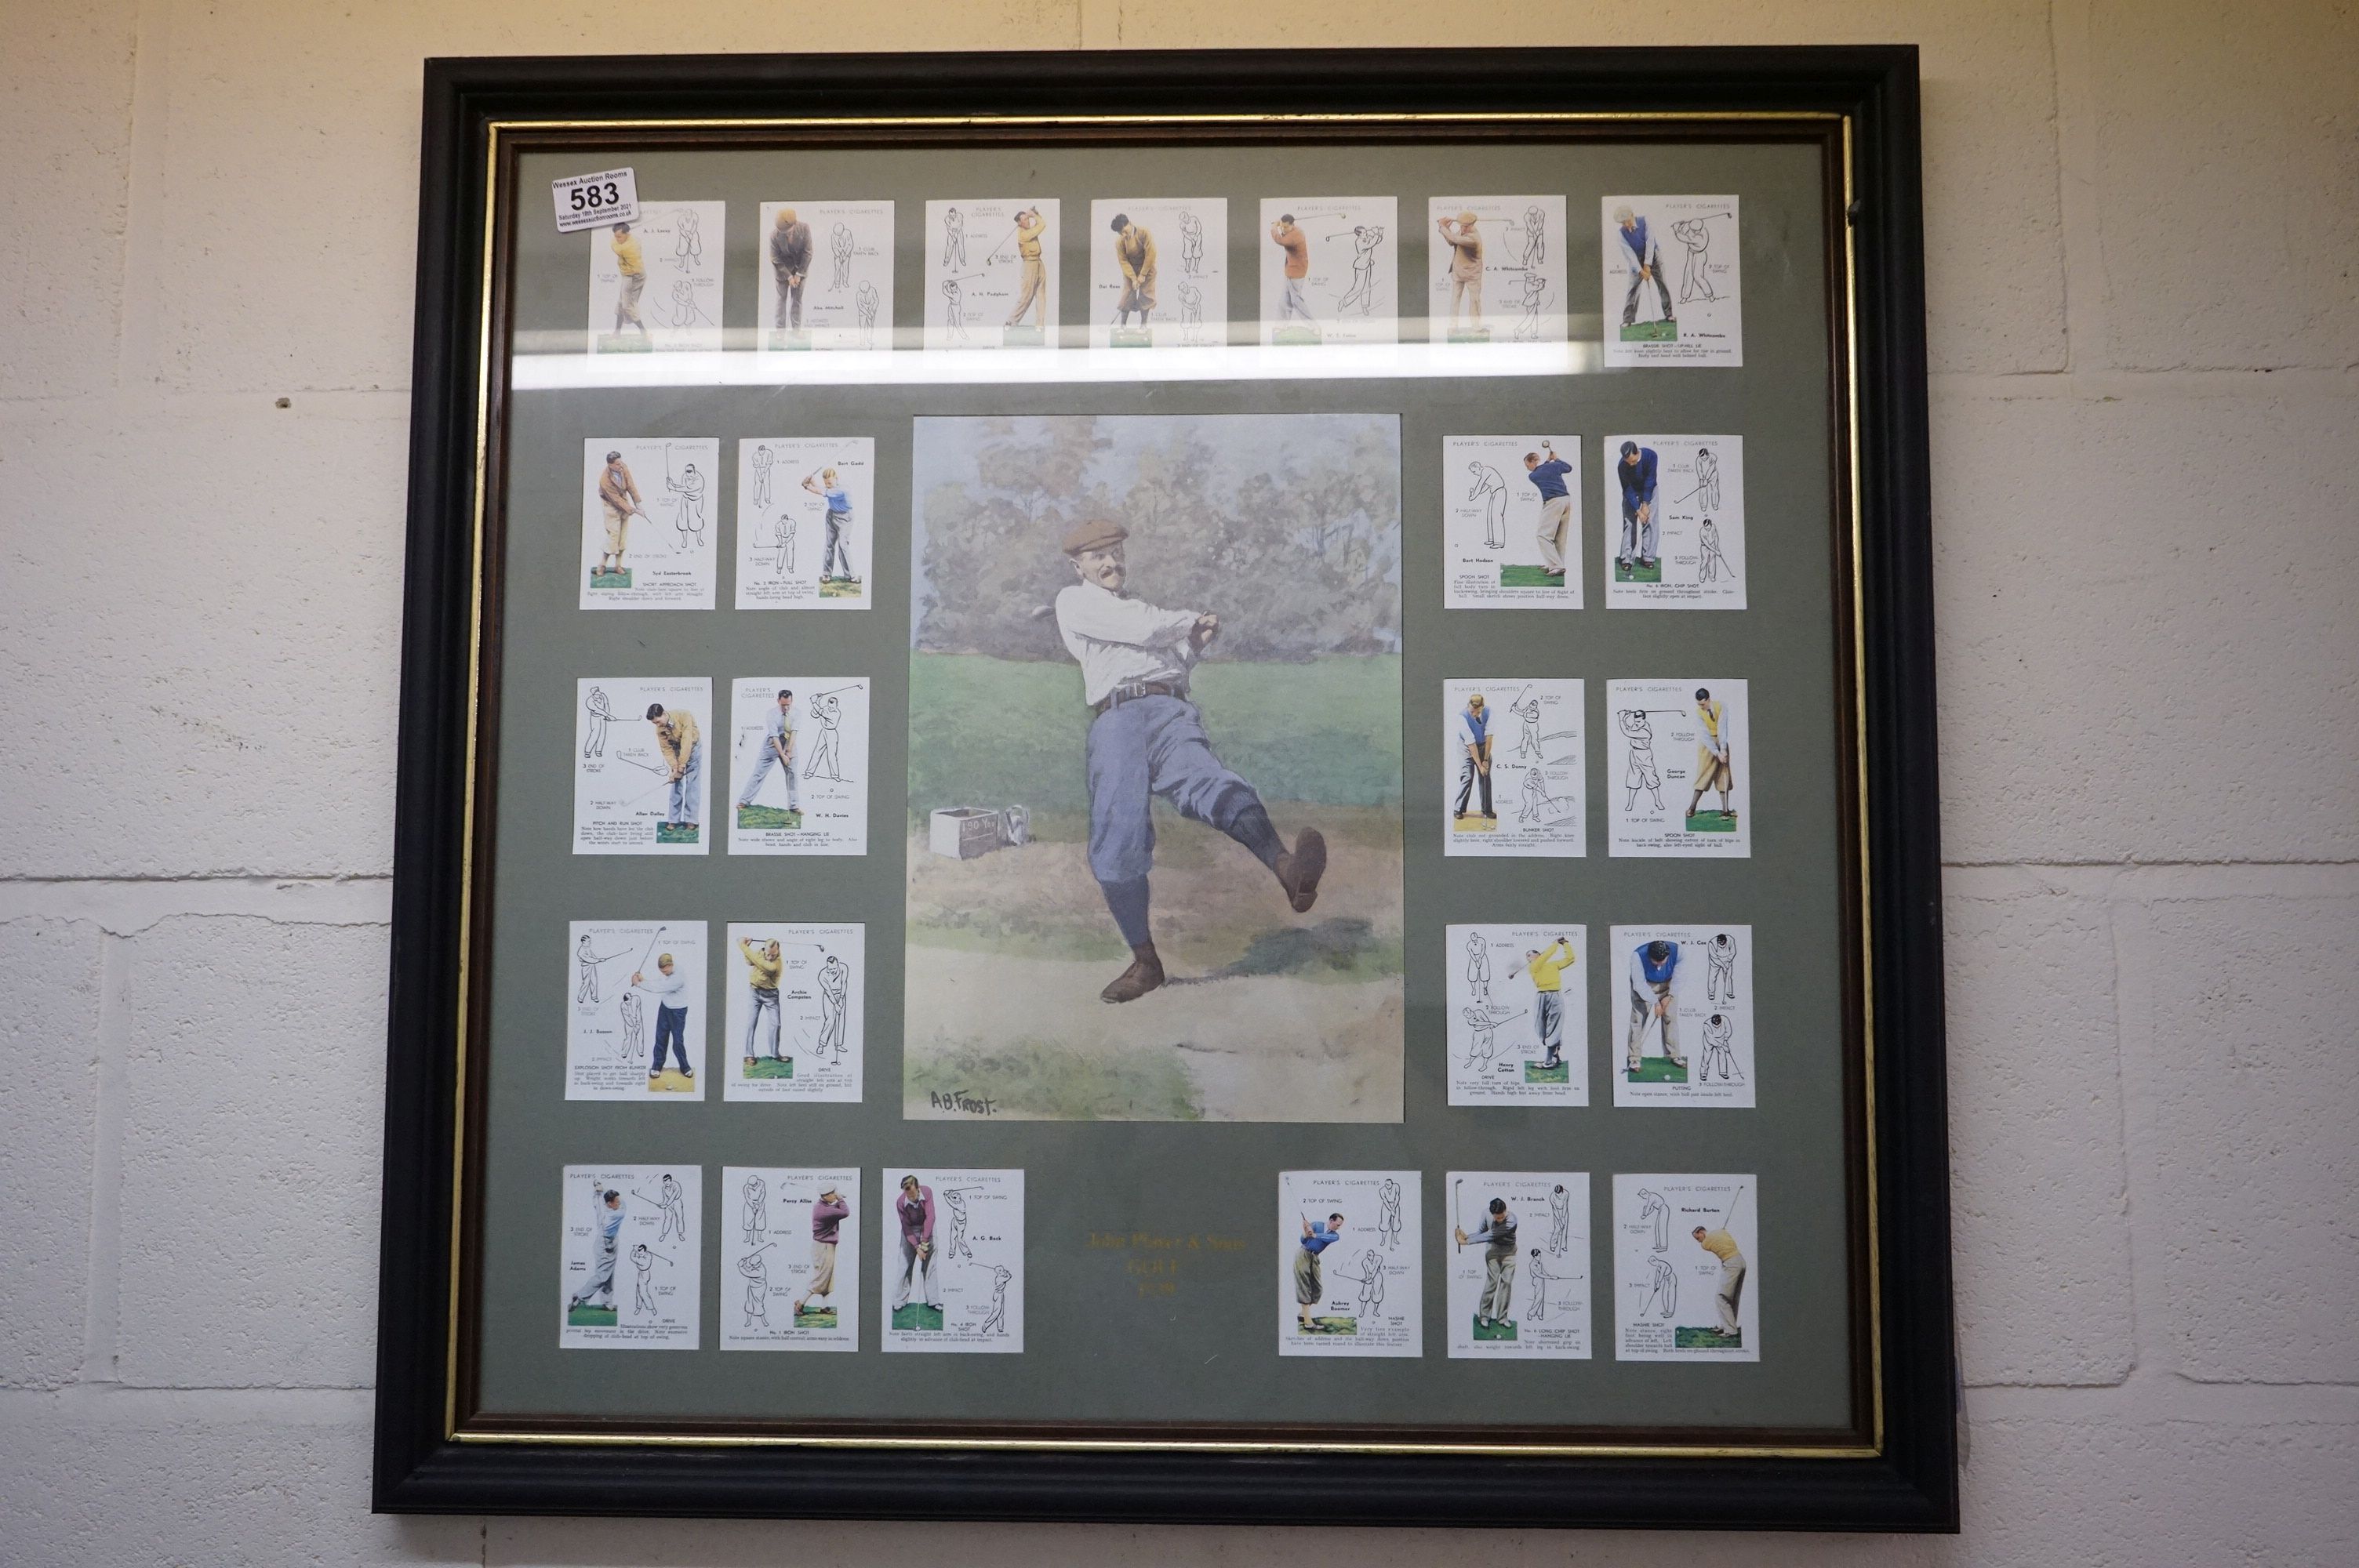 Golf - a John Player commemorative picture portraying famous golfers and their play methods